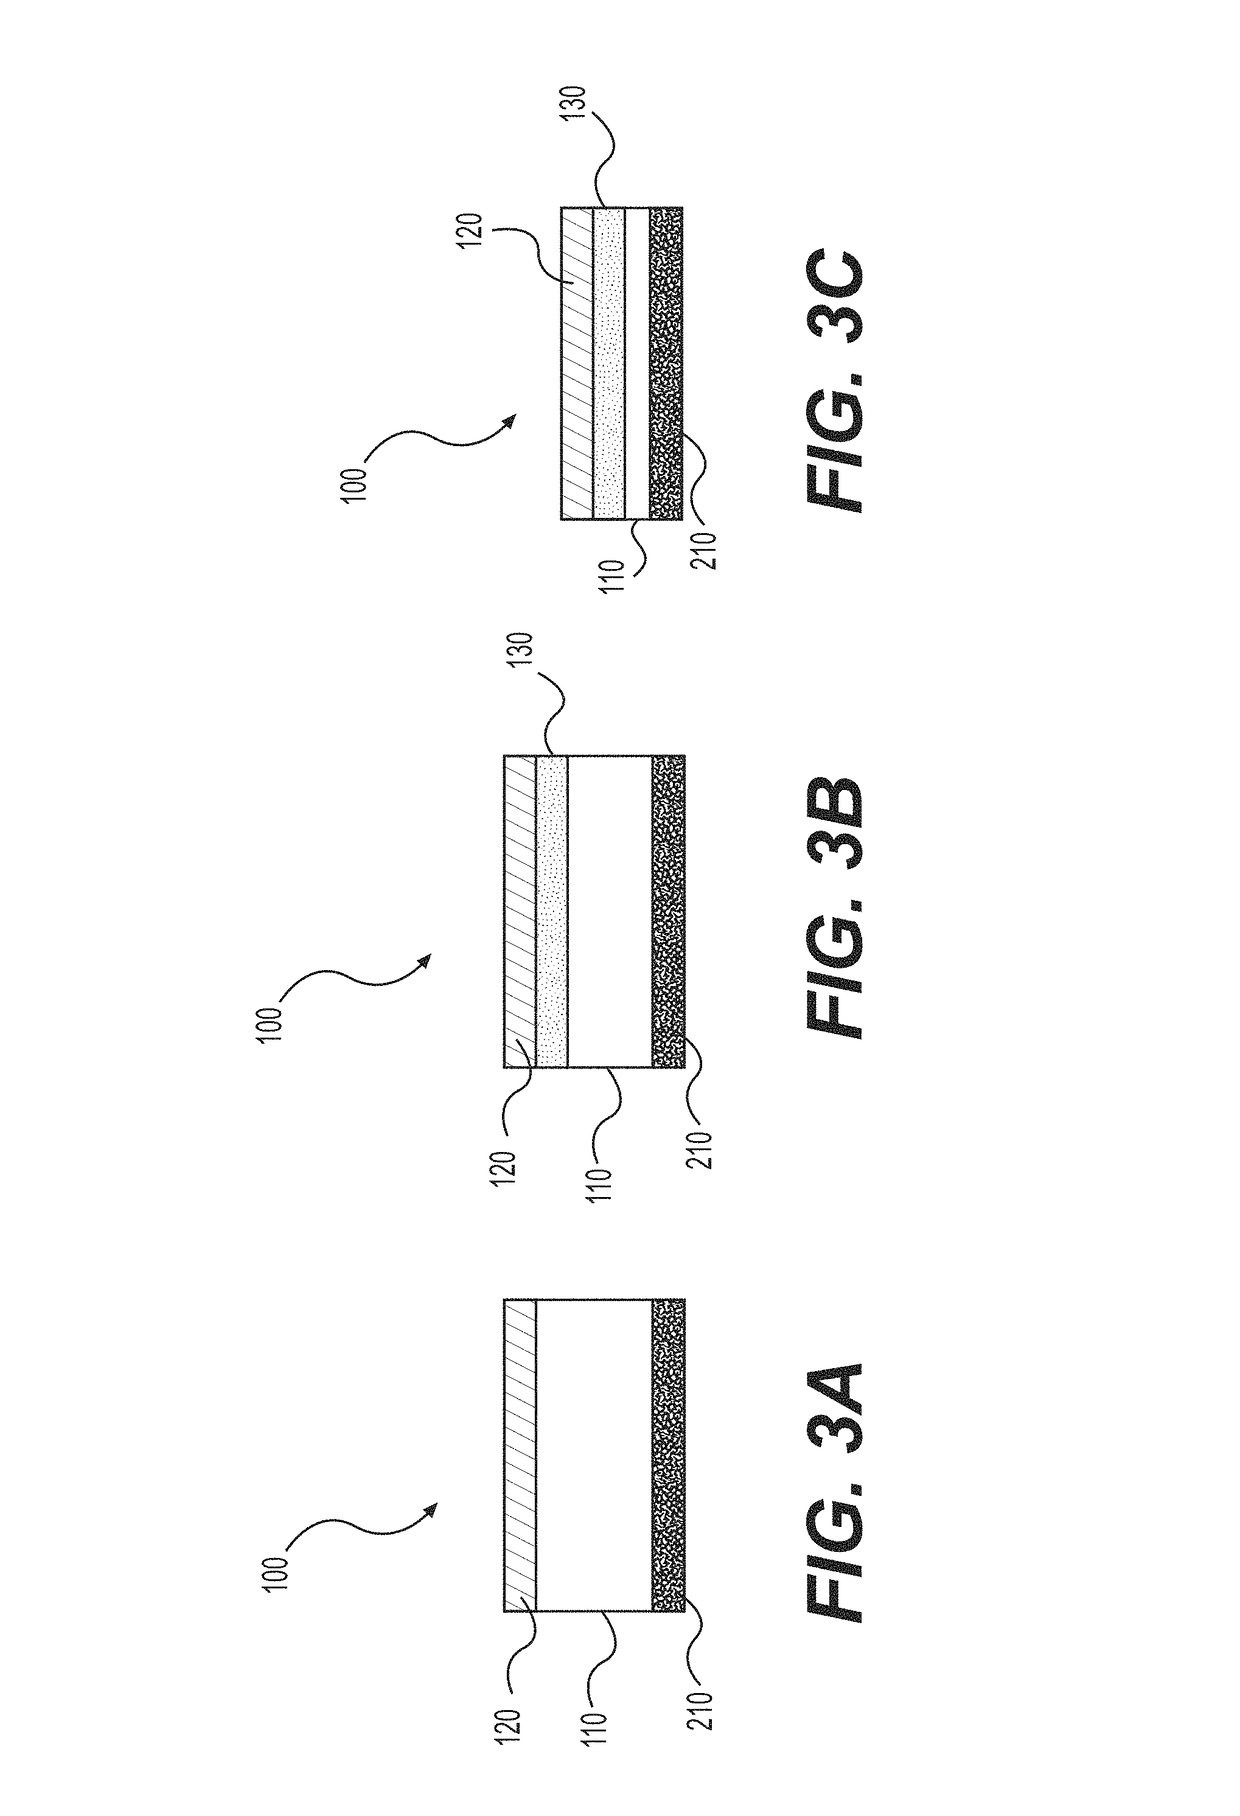 Systems and methods for measuring ultraviolet exposure